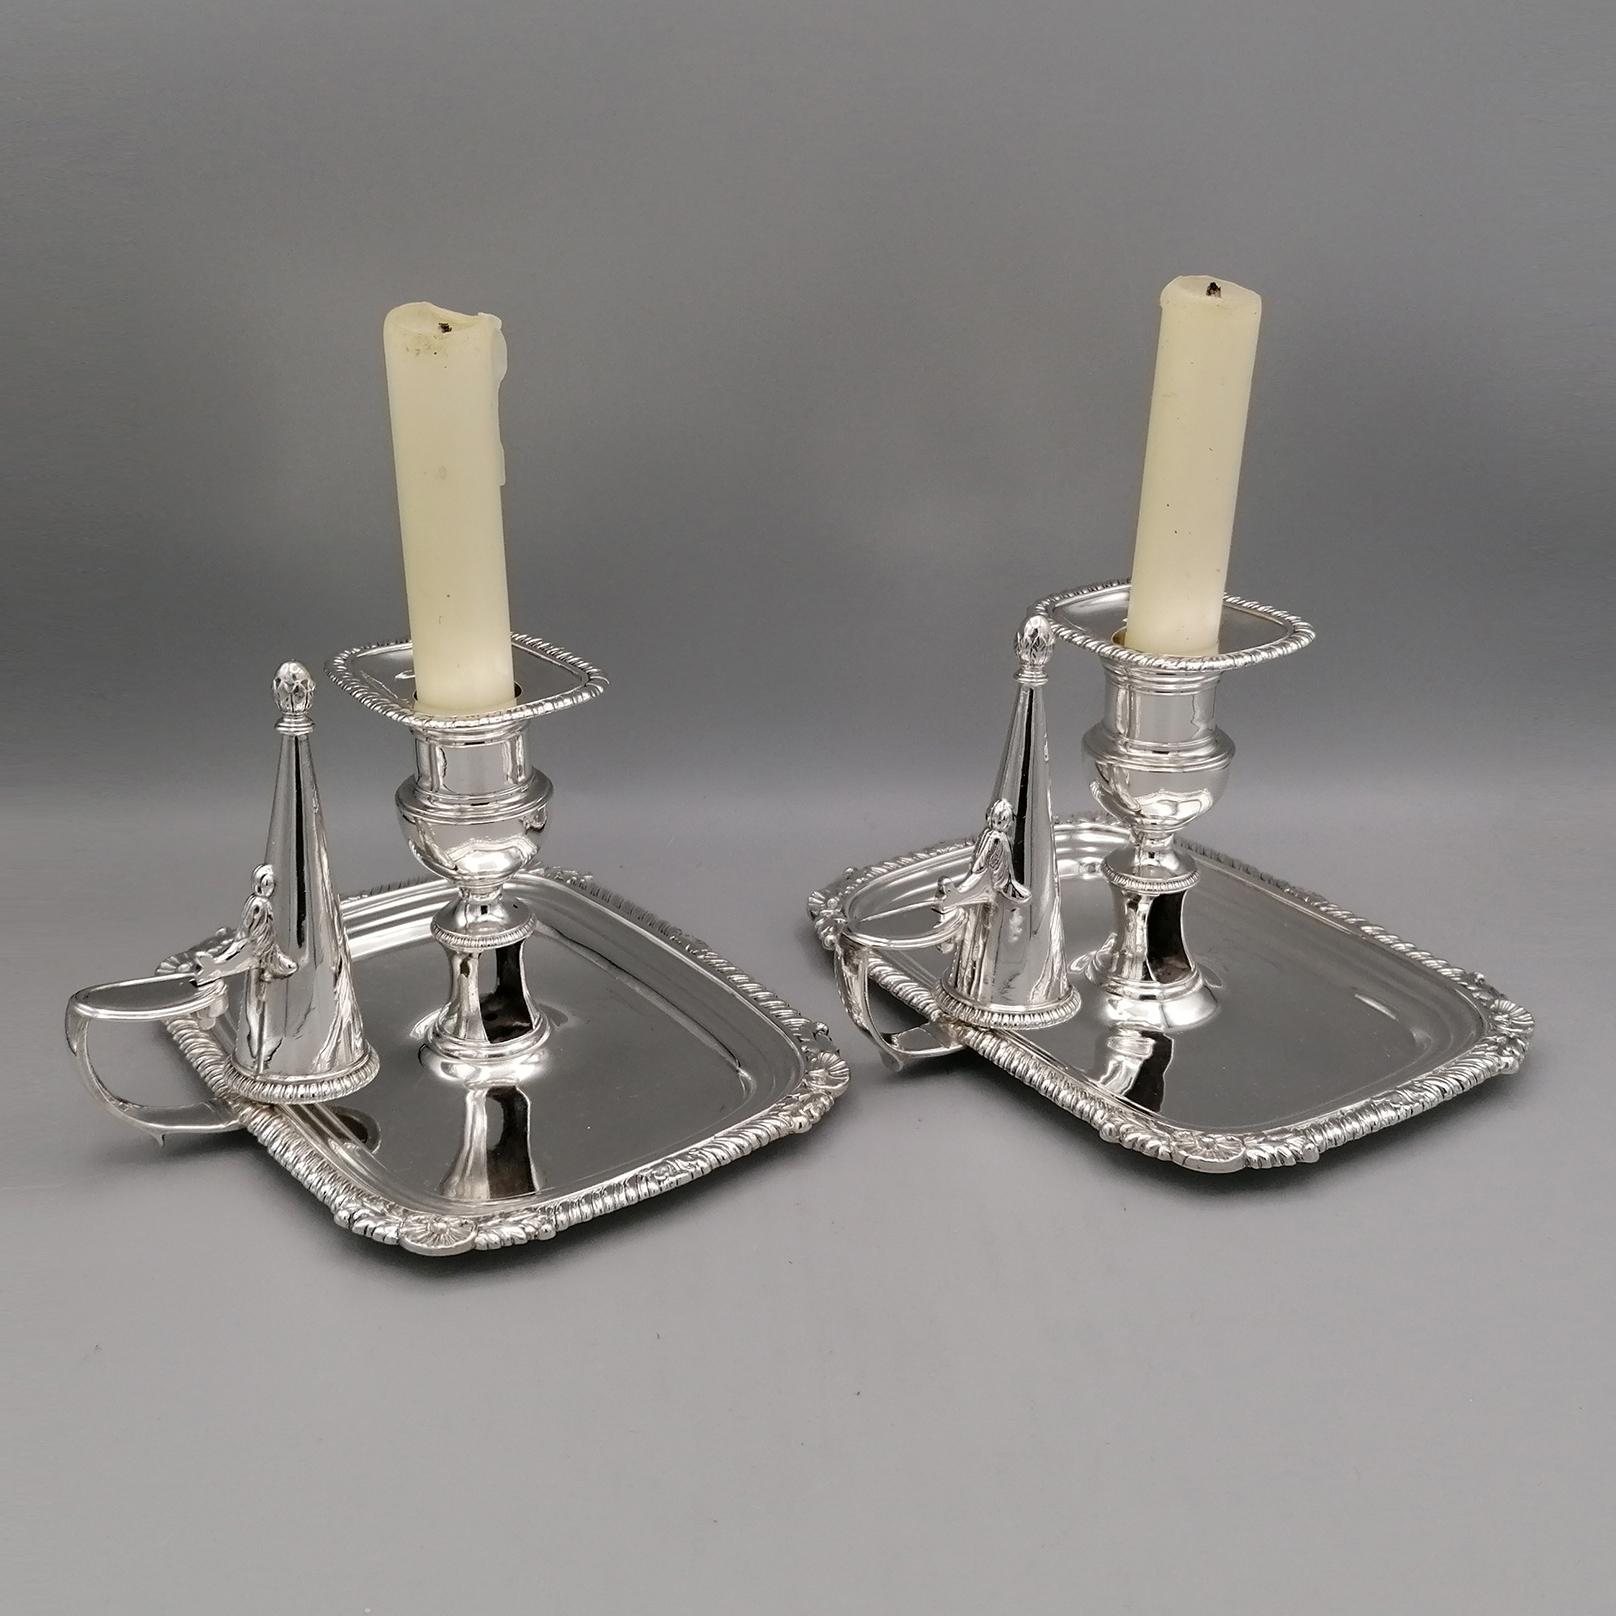 An important full marked Antique Georgian sterling silver pair of oblong chambersticks by William Bateman I°, 
having a rectangular body with a gadroon & shell border, a side-handle with original removable snuffer. 
These elegant antique silver